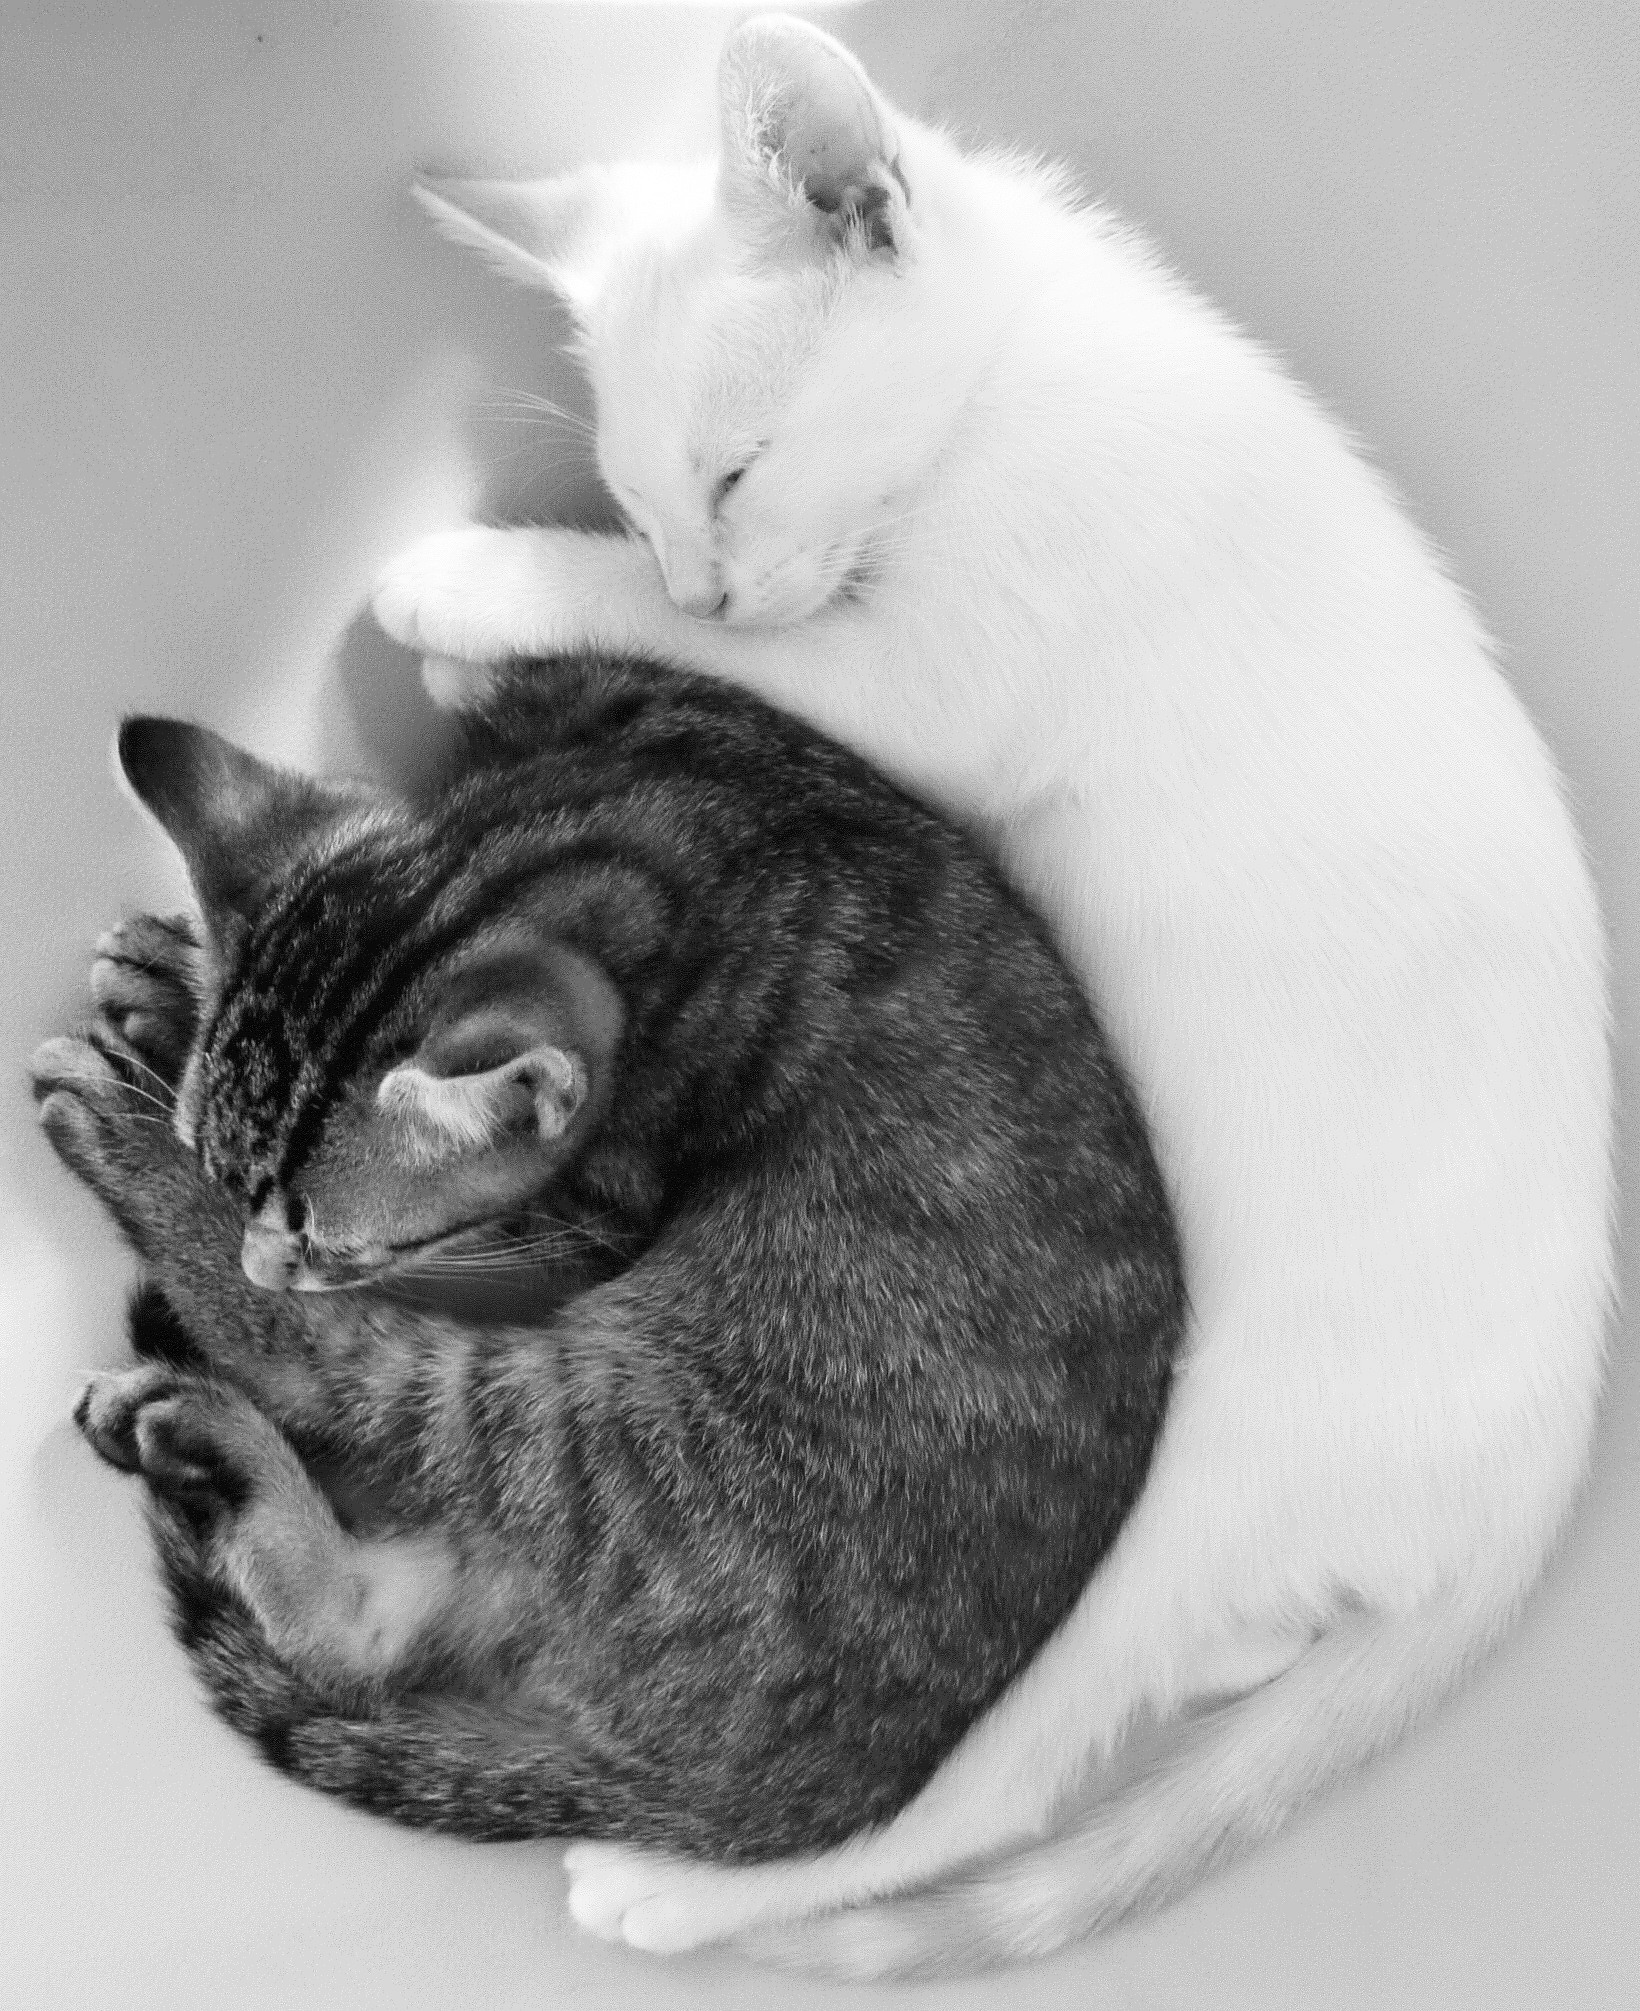 two cats are in a round sleeping nest